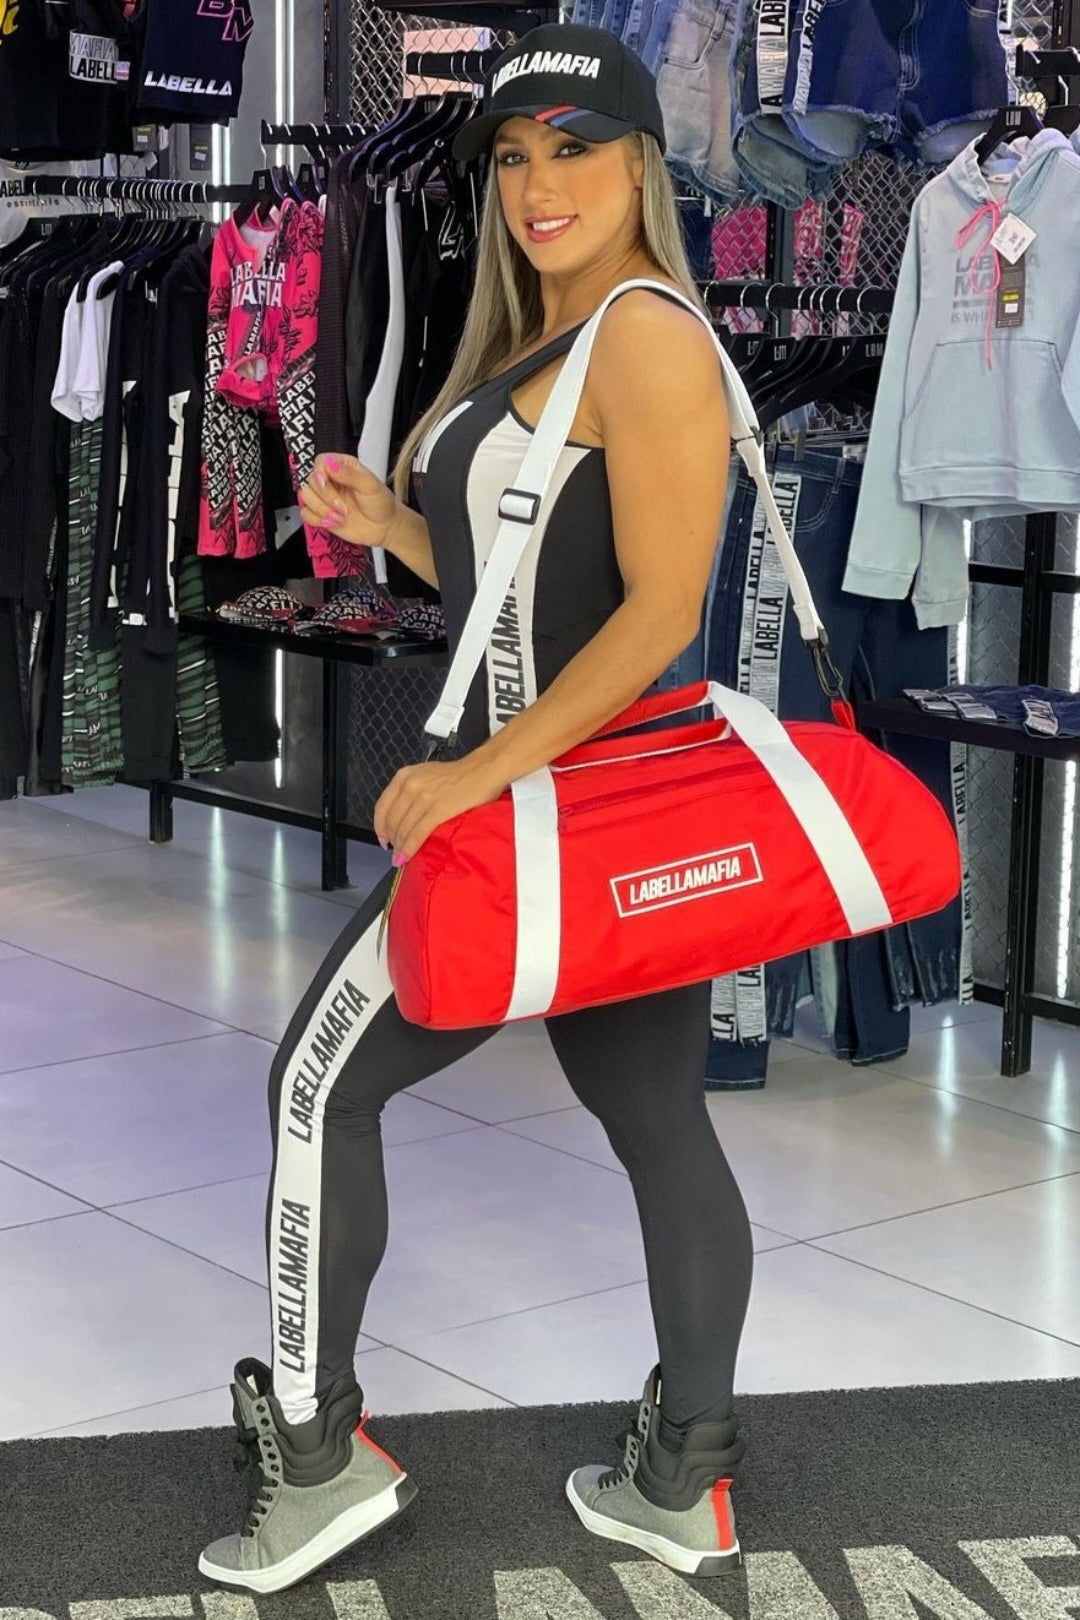 Bag Fitness Red